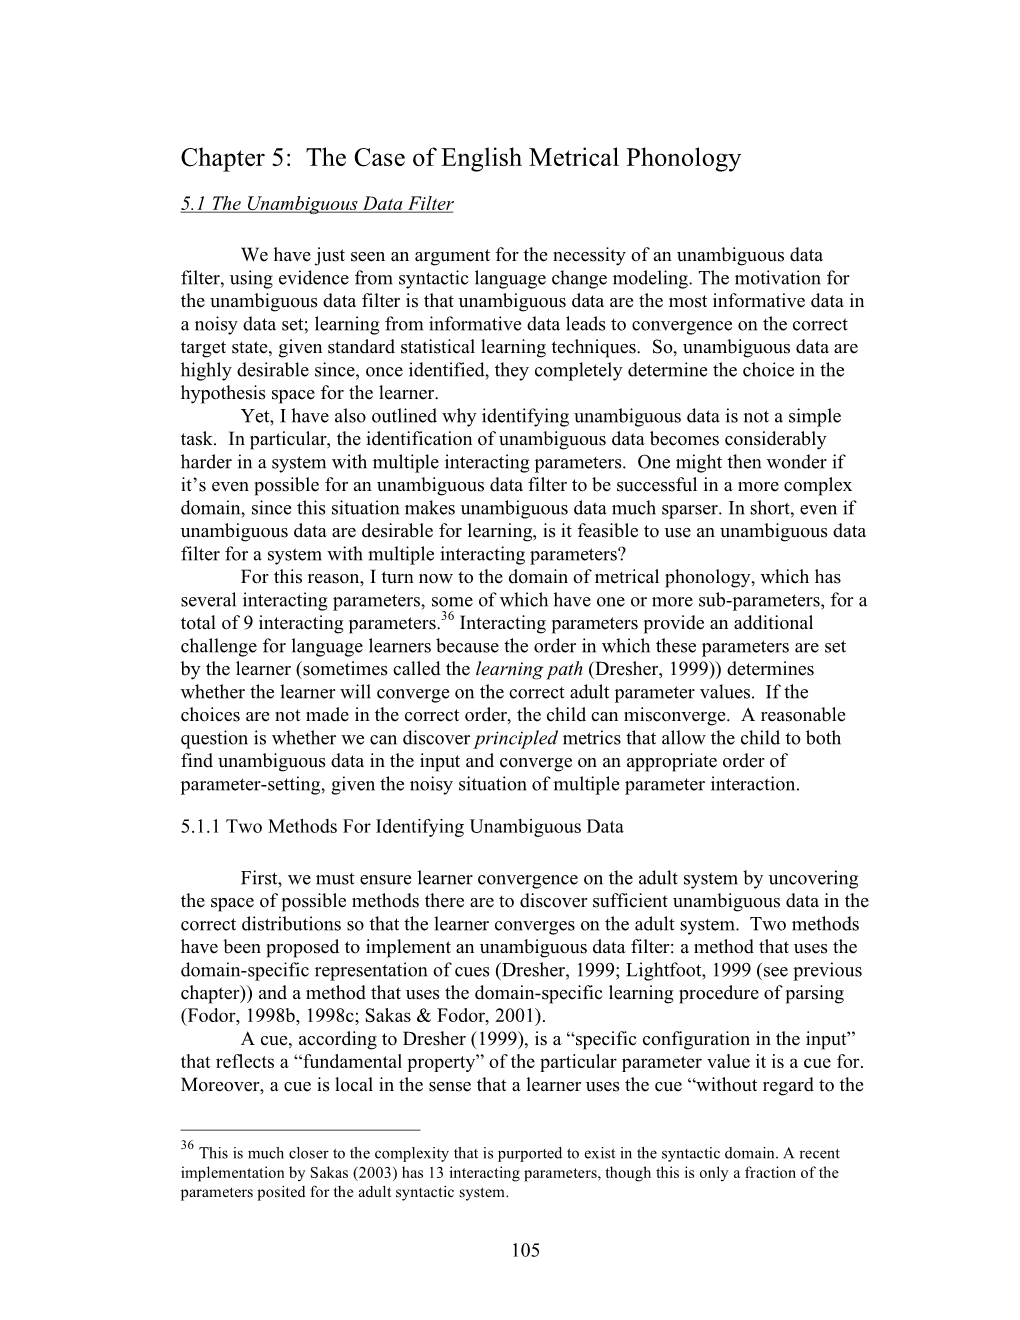 Chapter 5: the Case of English Metrical Phonology